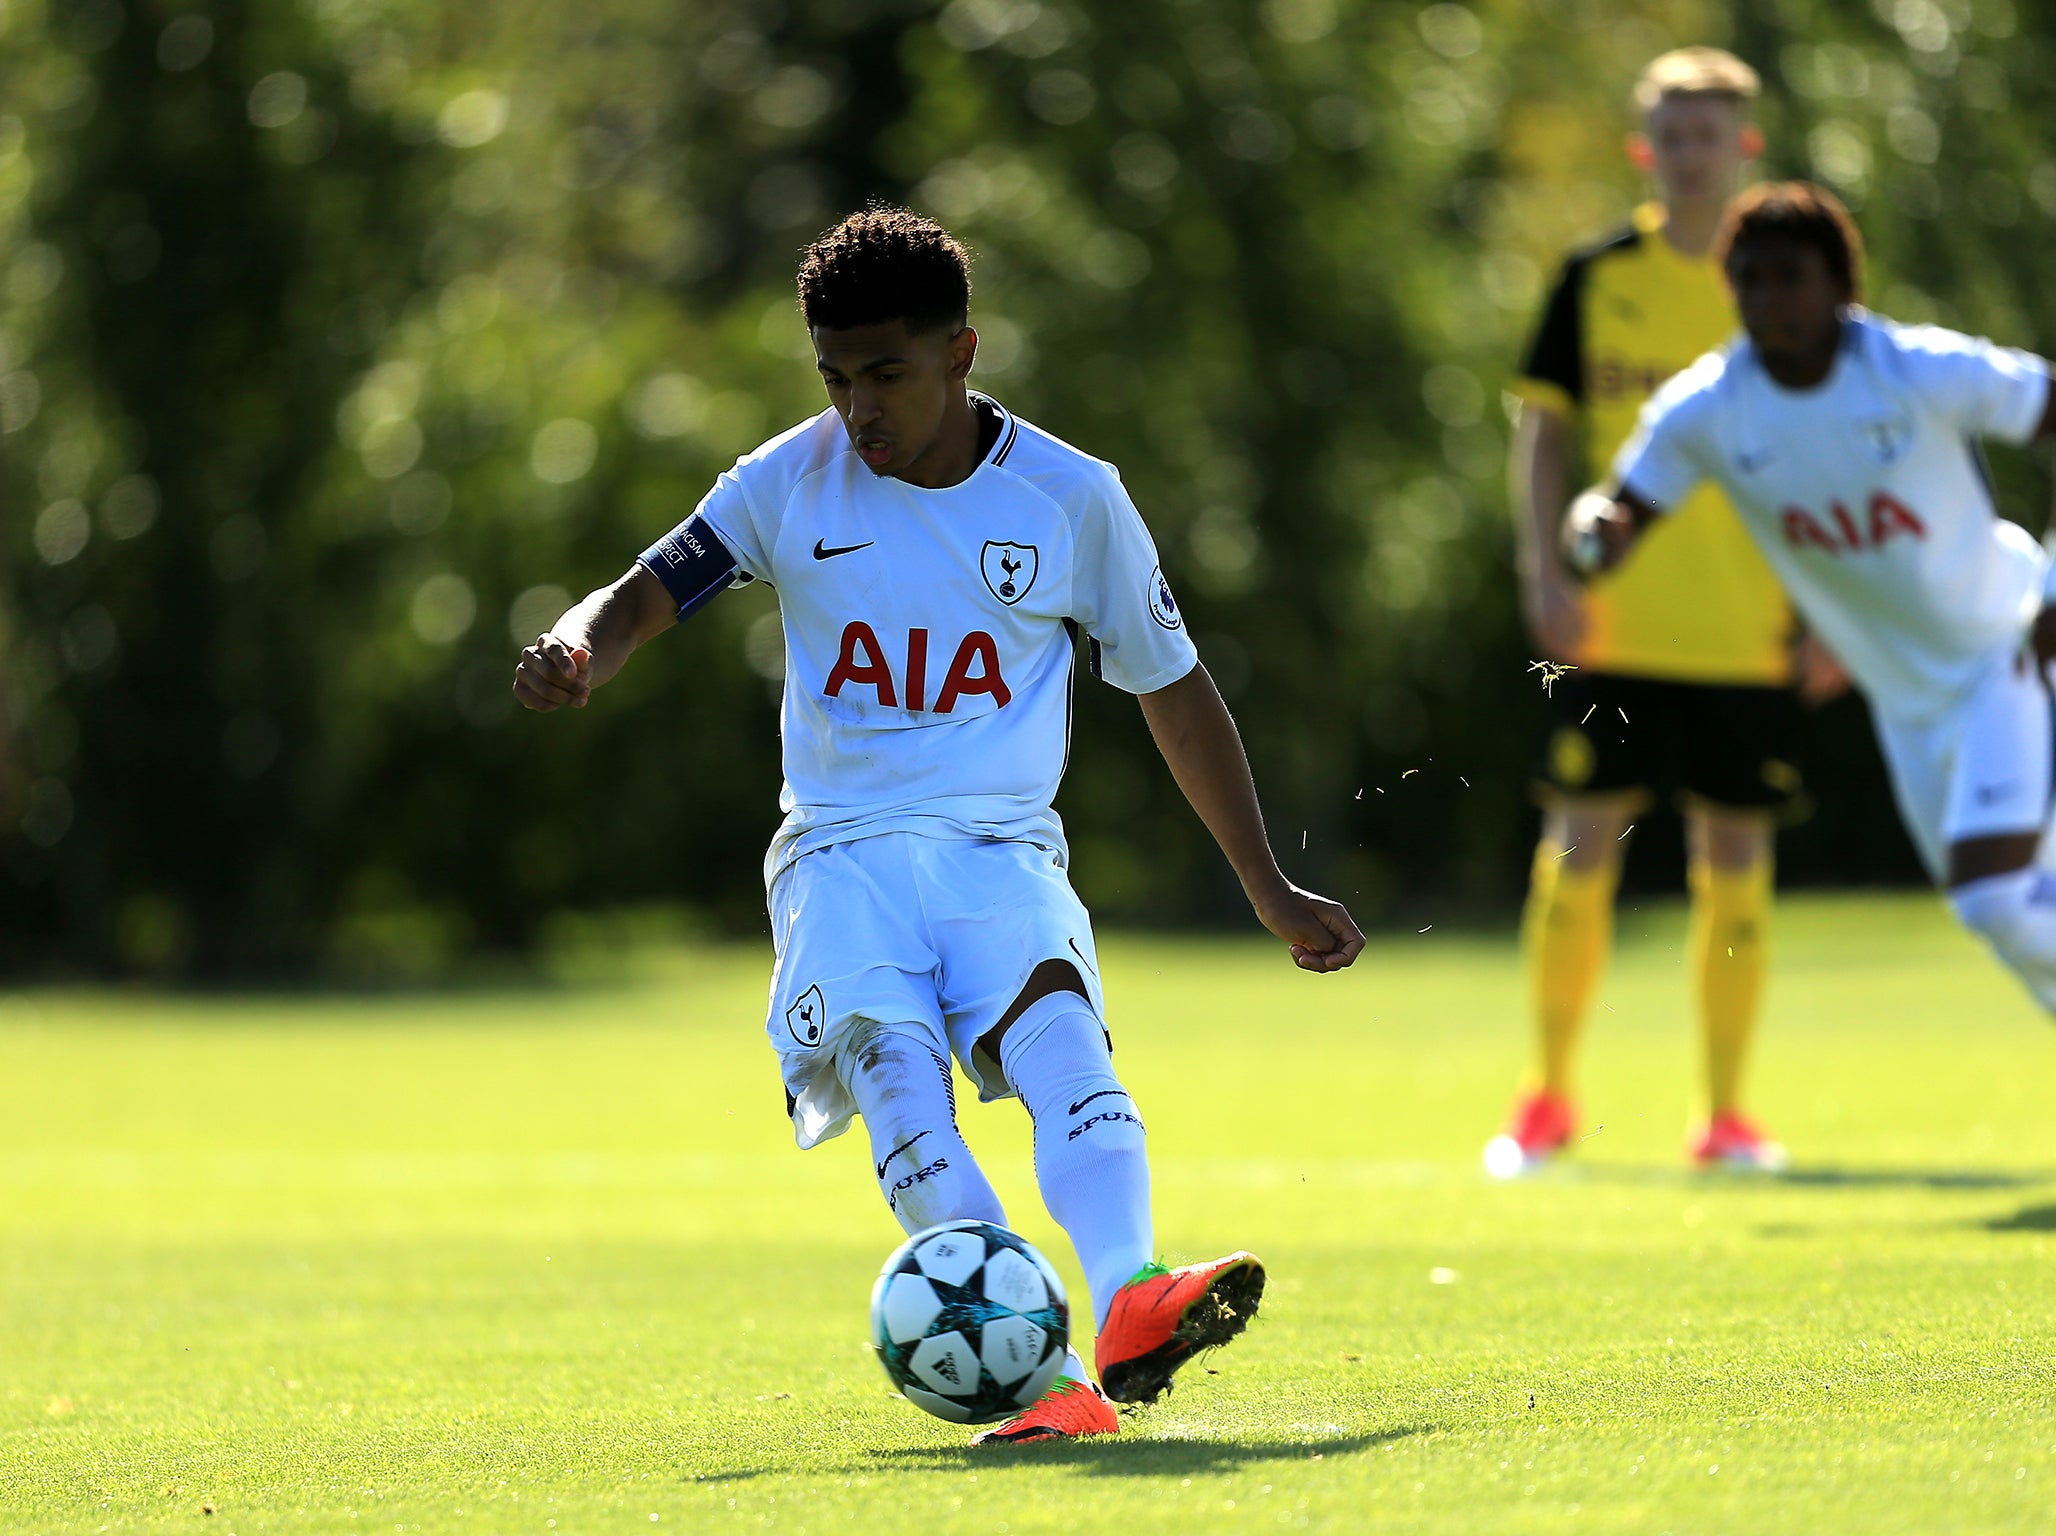 Edwards shone for Spurs in the Youth League